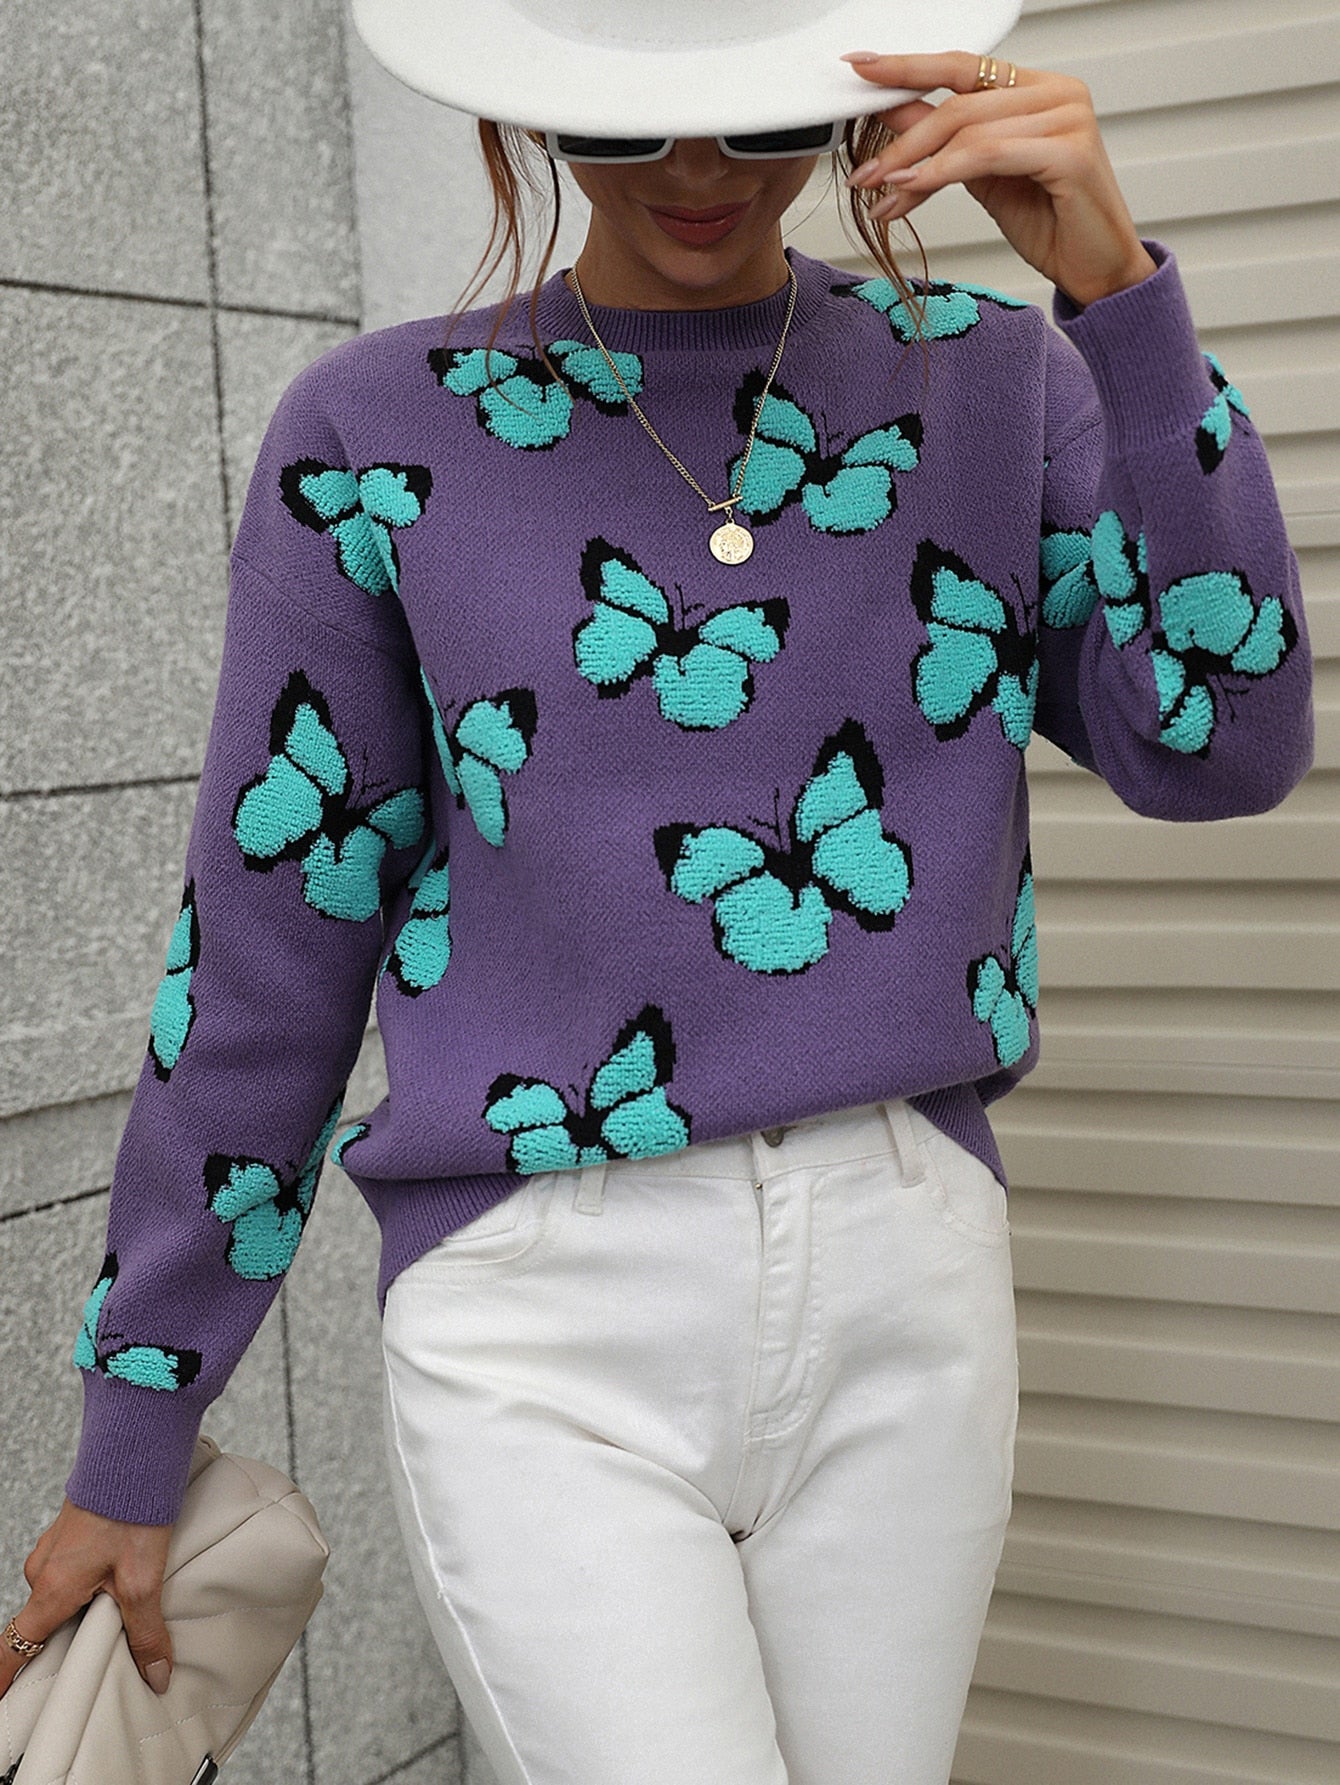 O Neck Butterfly Print Sweater Women Long Sleeve Knitted Sweaters Autumn Winter Pullover Ladies Tops Loose Jumper Pull Femme